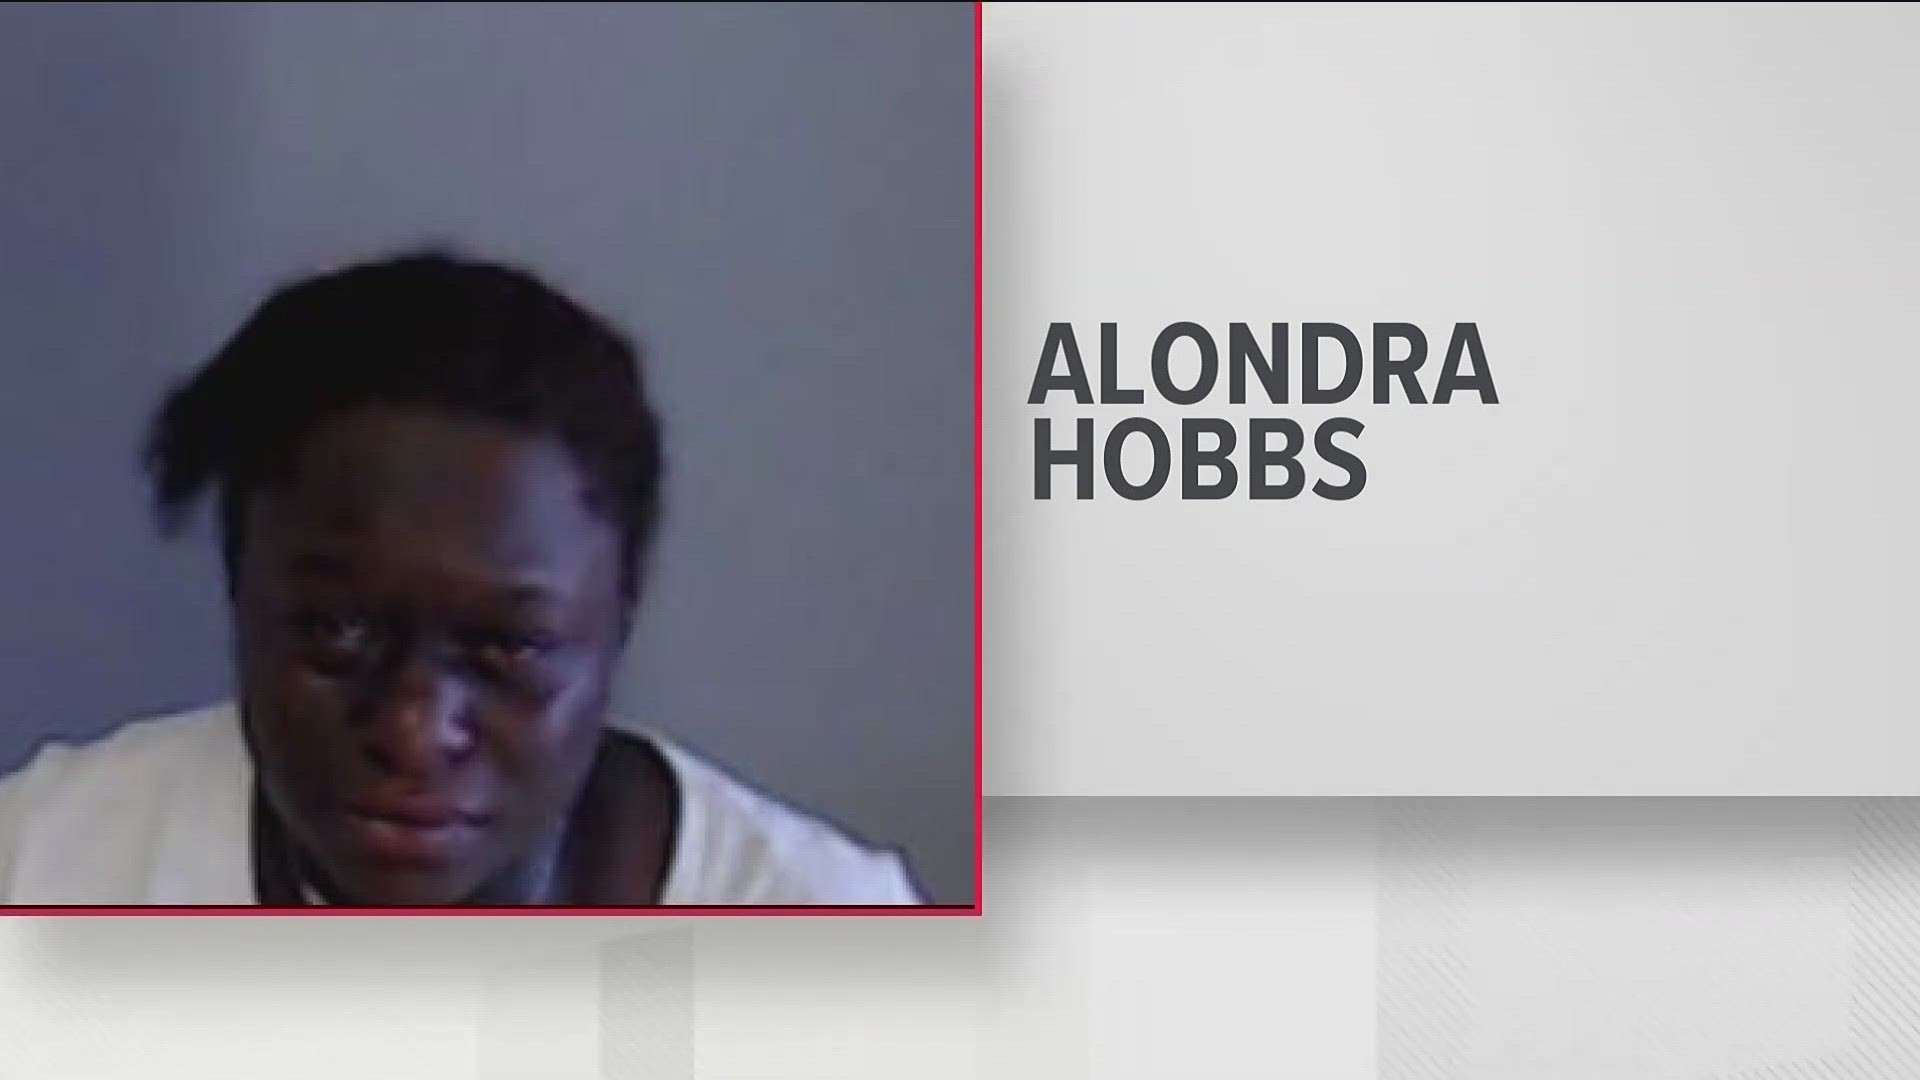 DeKalb County Police said they charged Alondra Hobbs with felony murder. Her daughter, 7-year-old Alivia Hobbs-Jordan, was found dead on June 25.